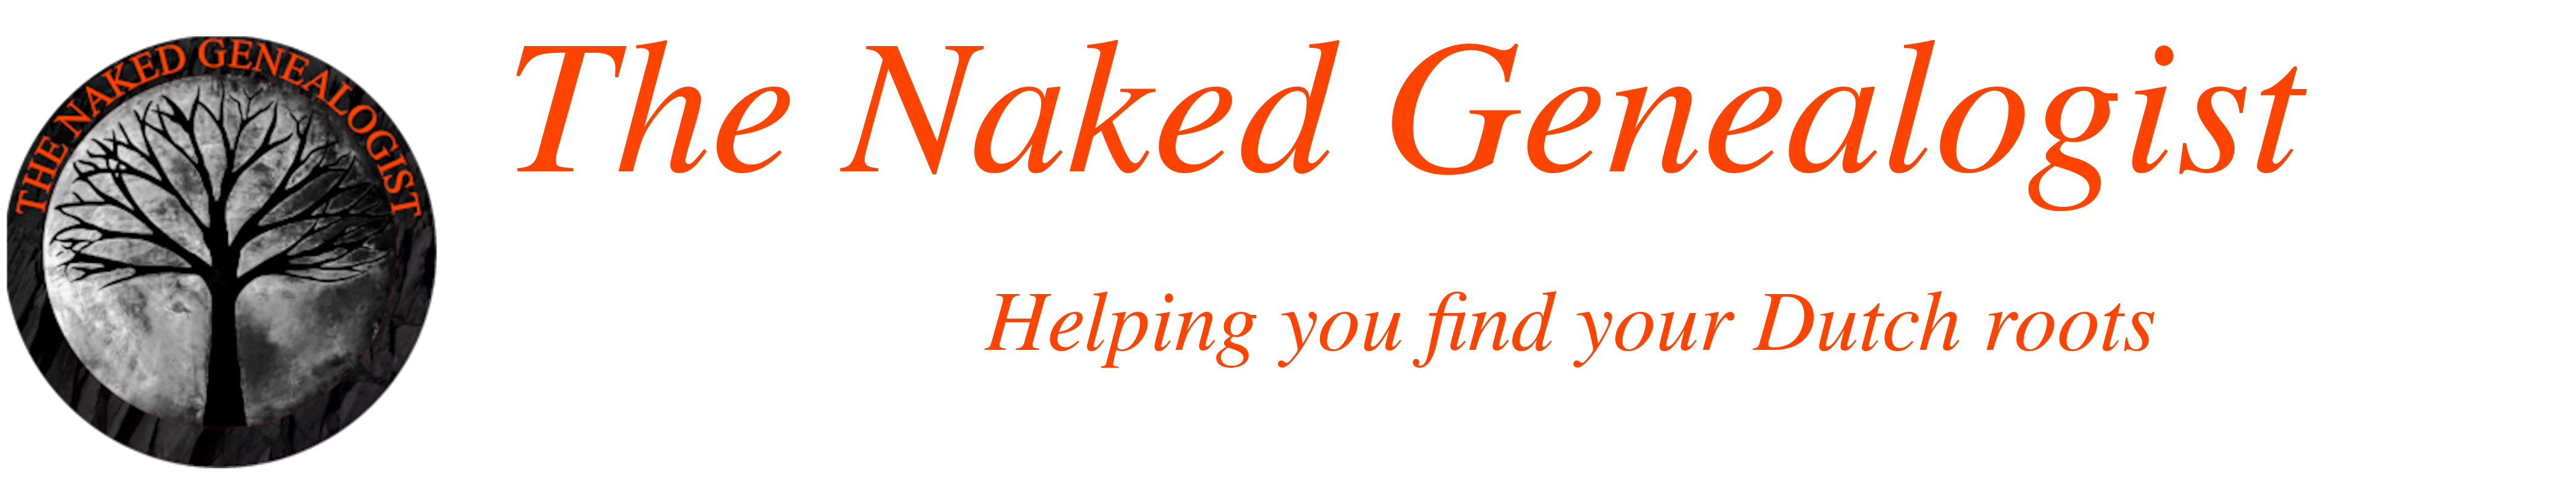 The Naked Genealogist, helping you to find you Dutch roots